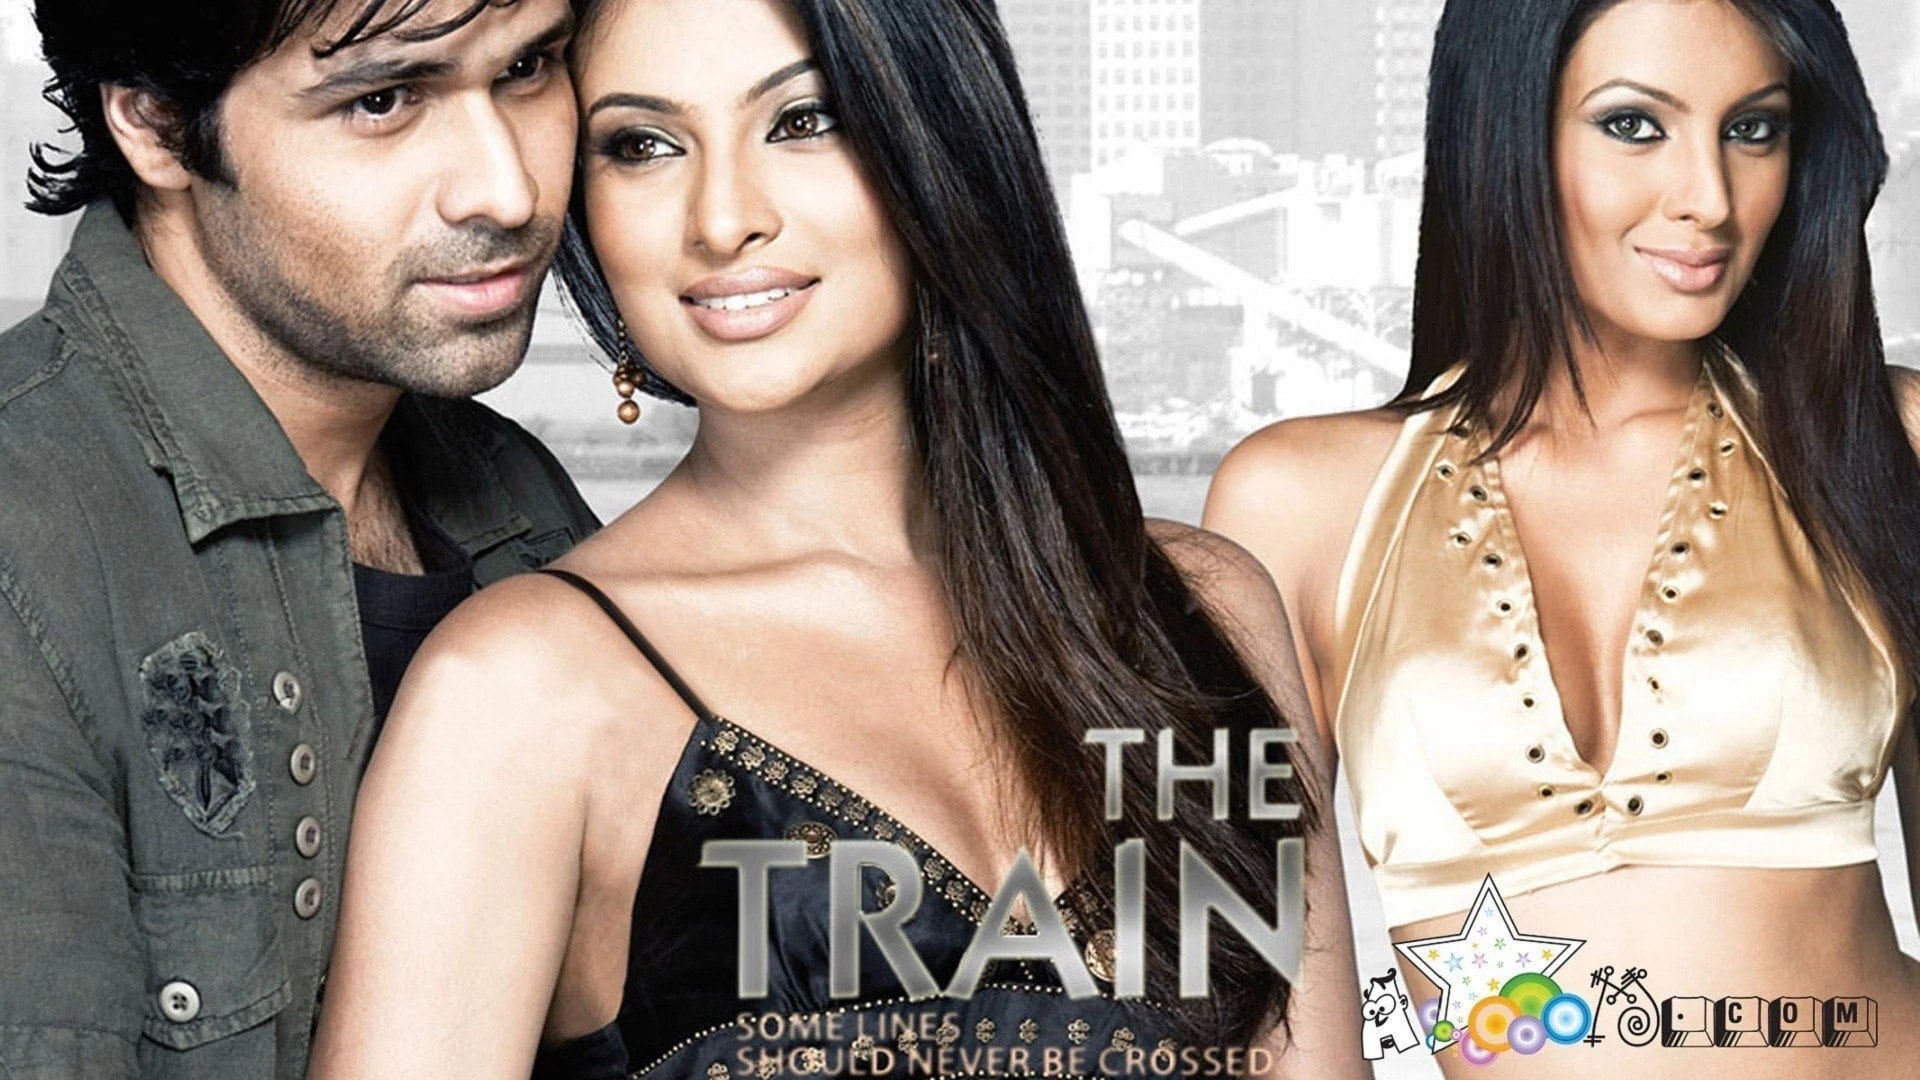 The Train: Some Lines Shoulder Never Be Crossed... (2007)